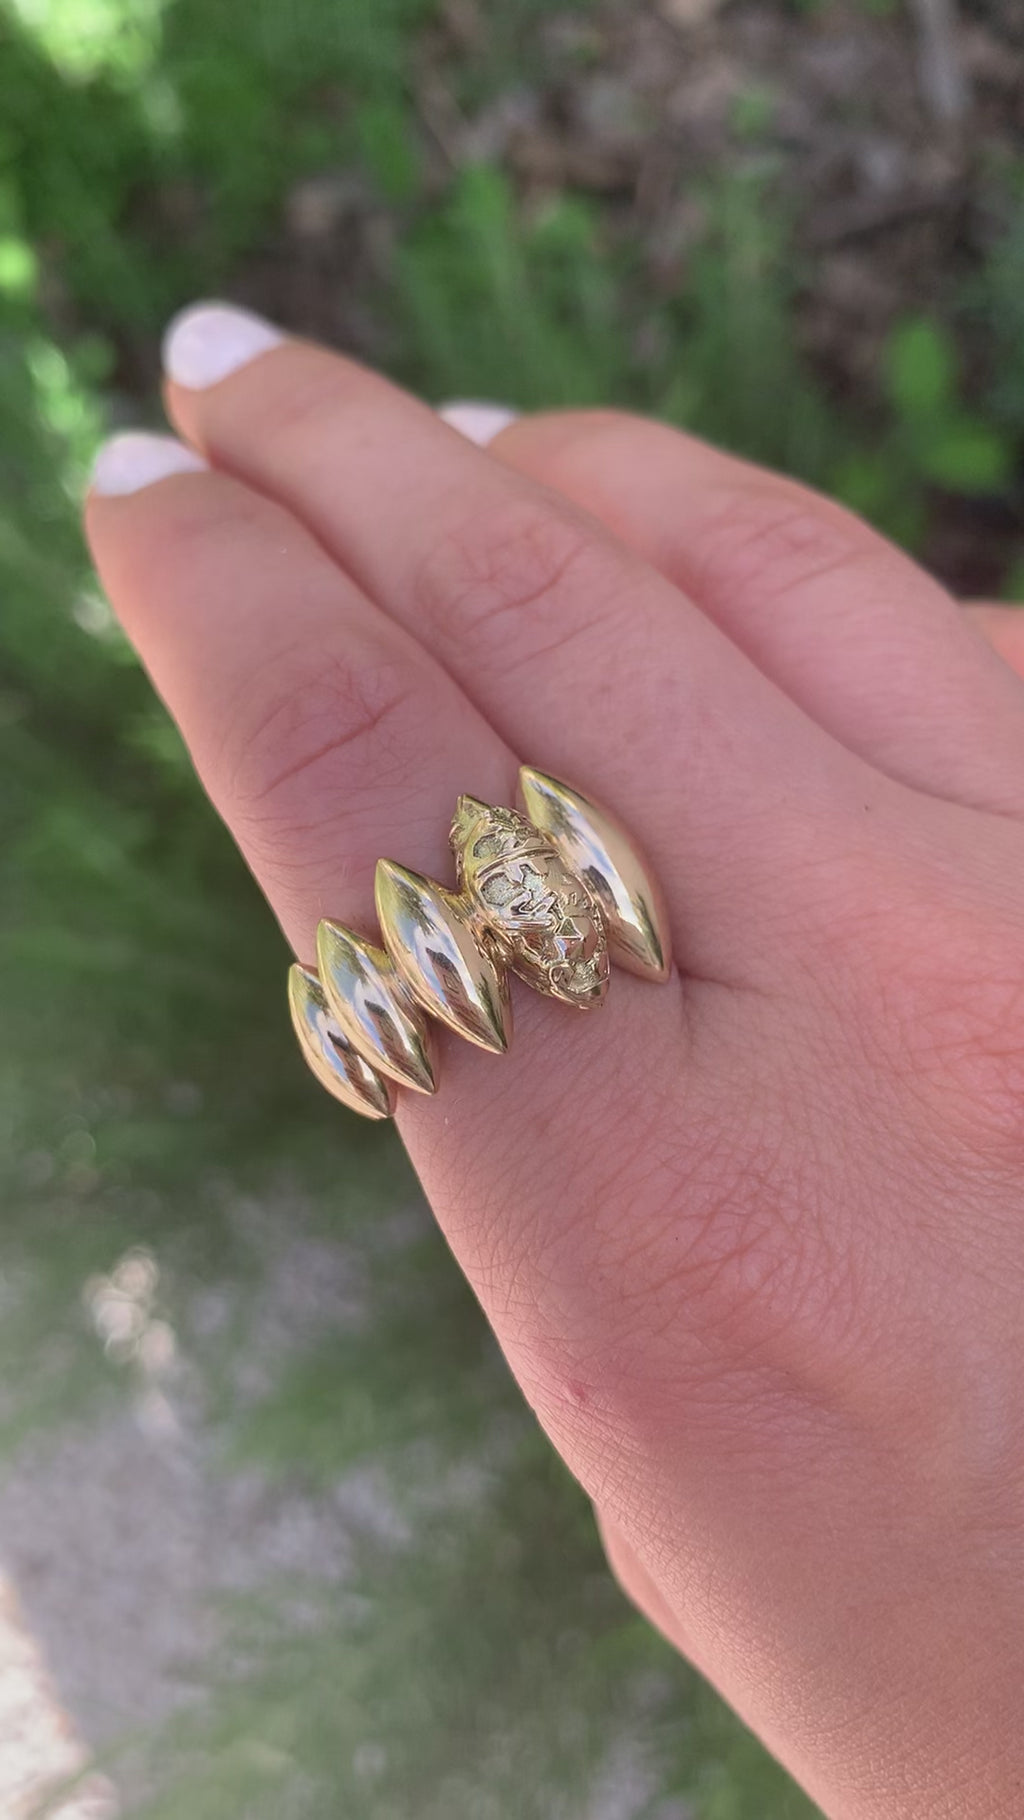 18 karat recycled yellow gold stalactites ring by fine jewelry designer Capucine H